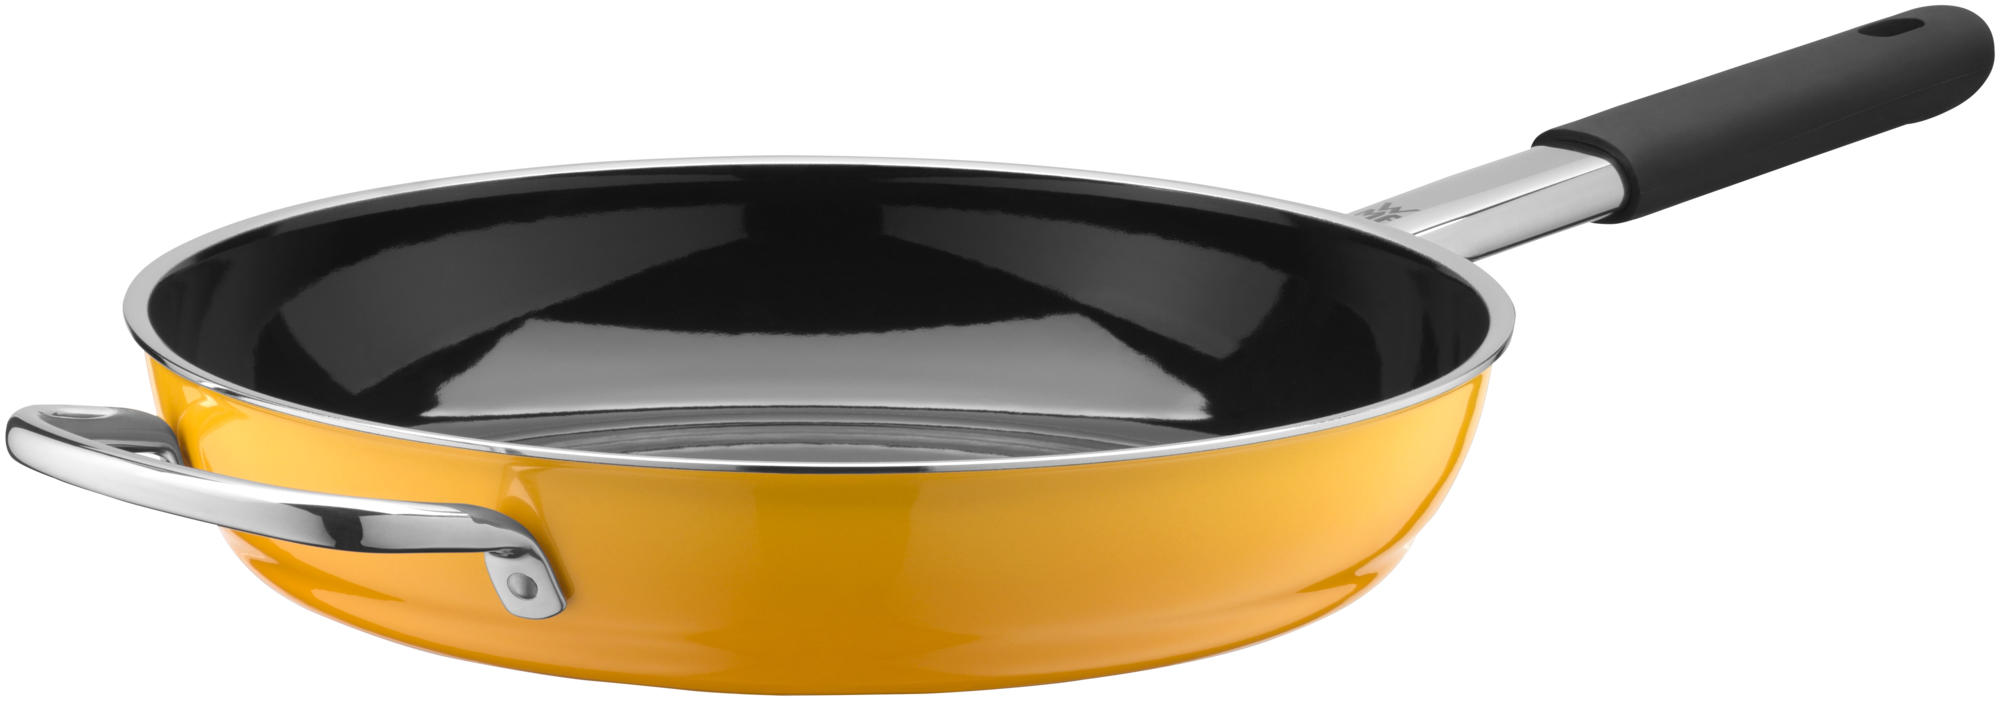 WMF Fusiontec Mineral Frypan 28cm Yellow